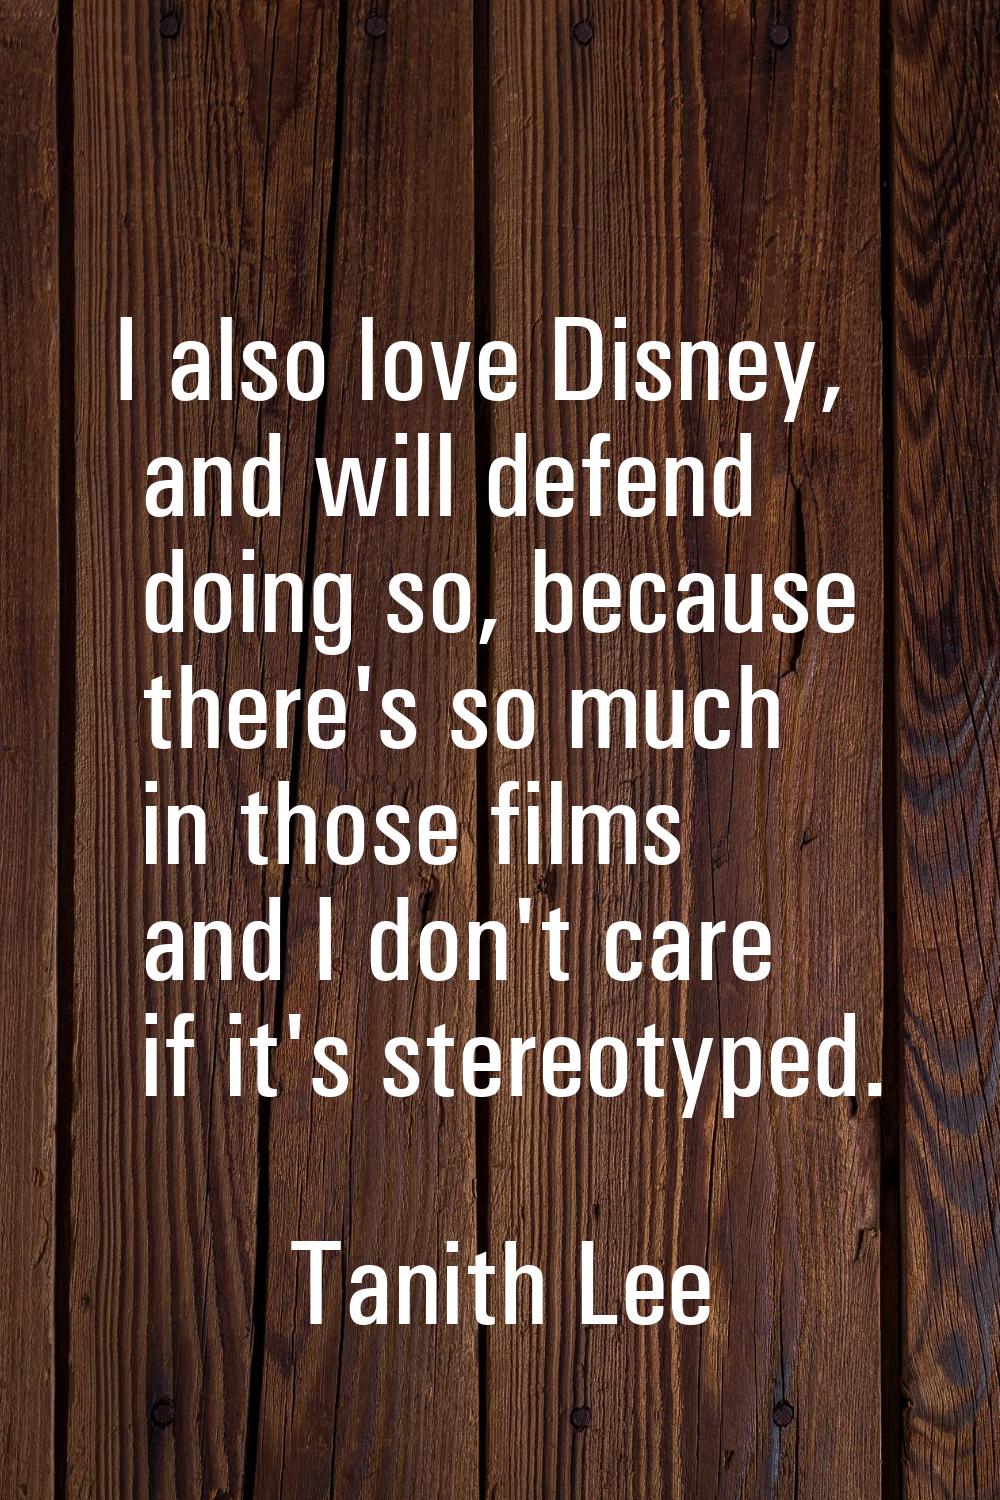 I also love Disney, and will defend doing so, because there's so much in those films and I don't ca